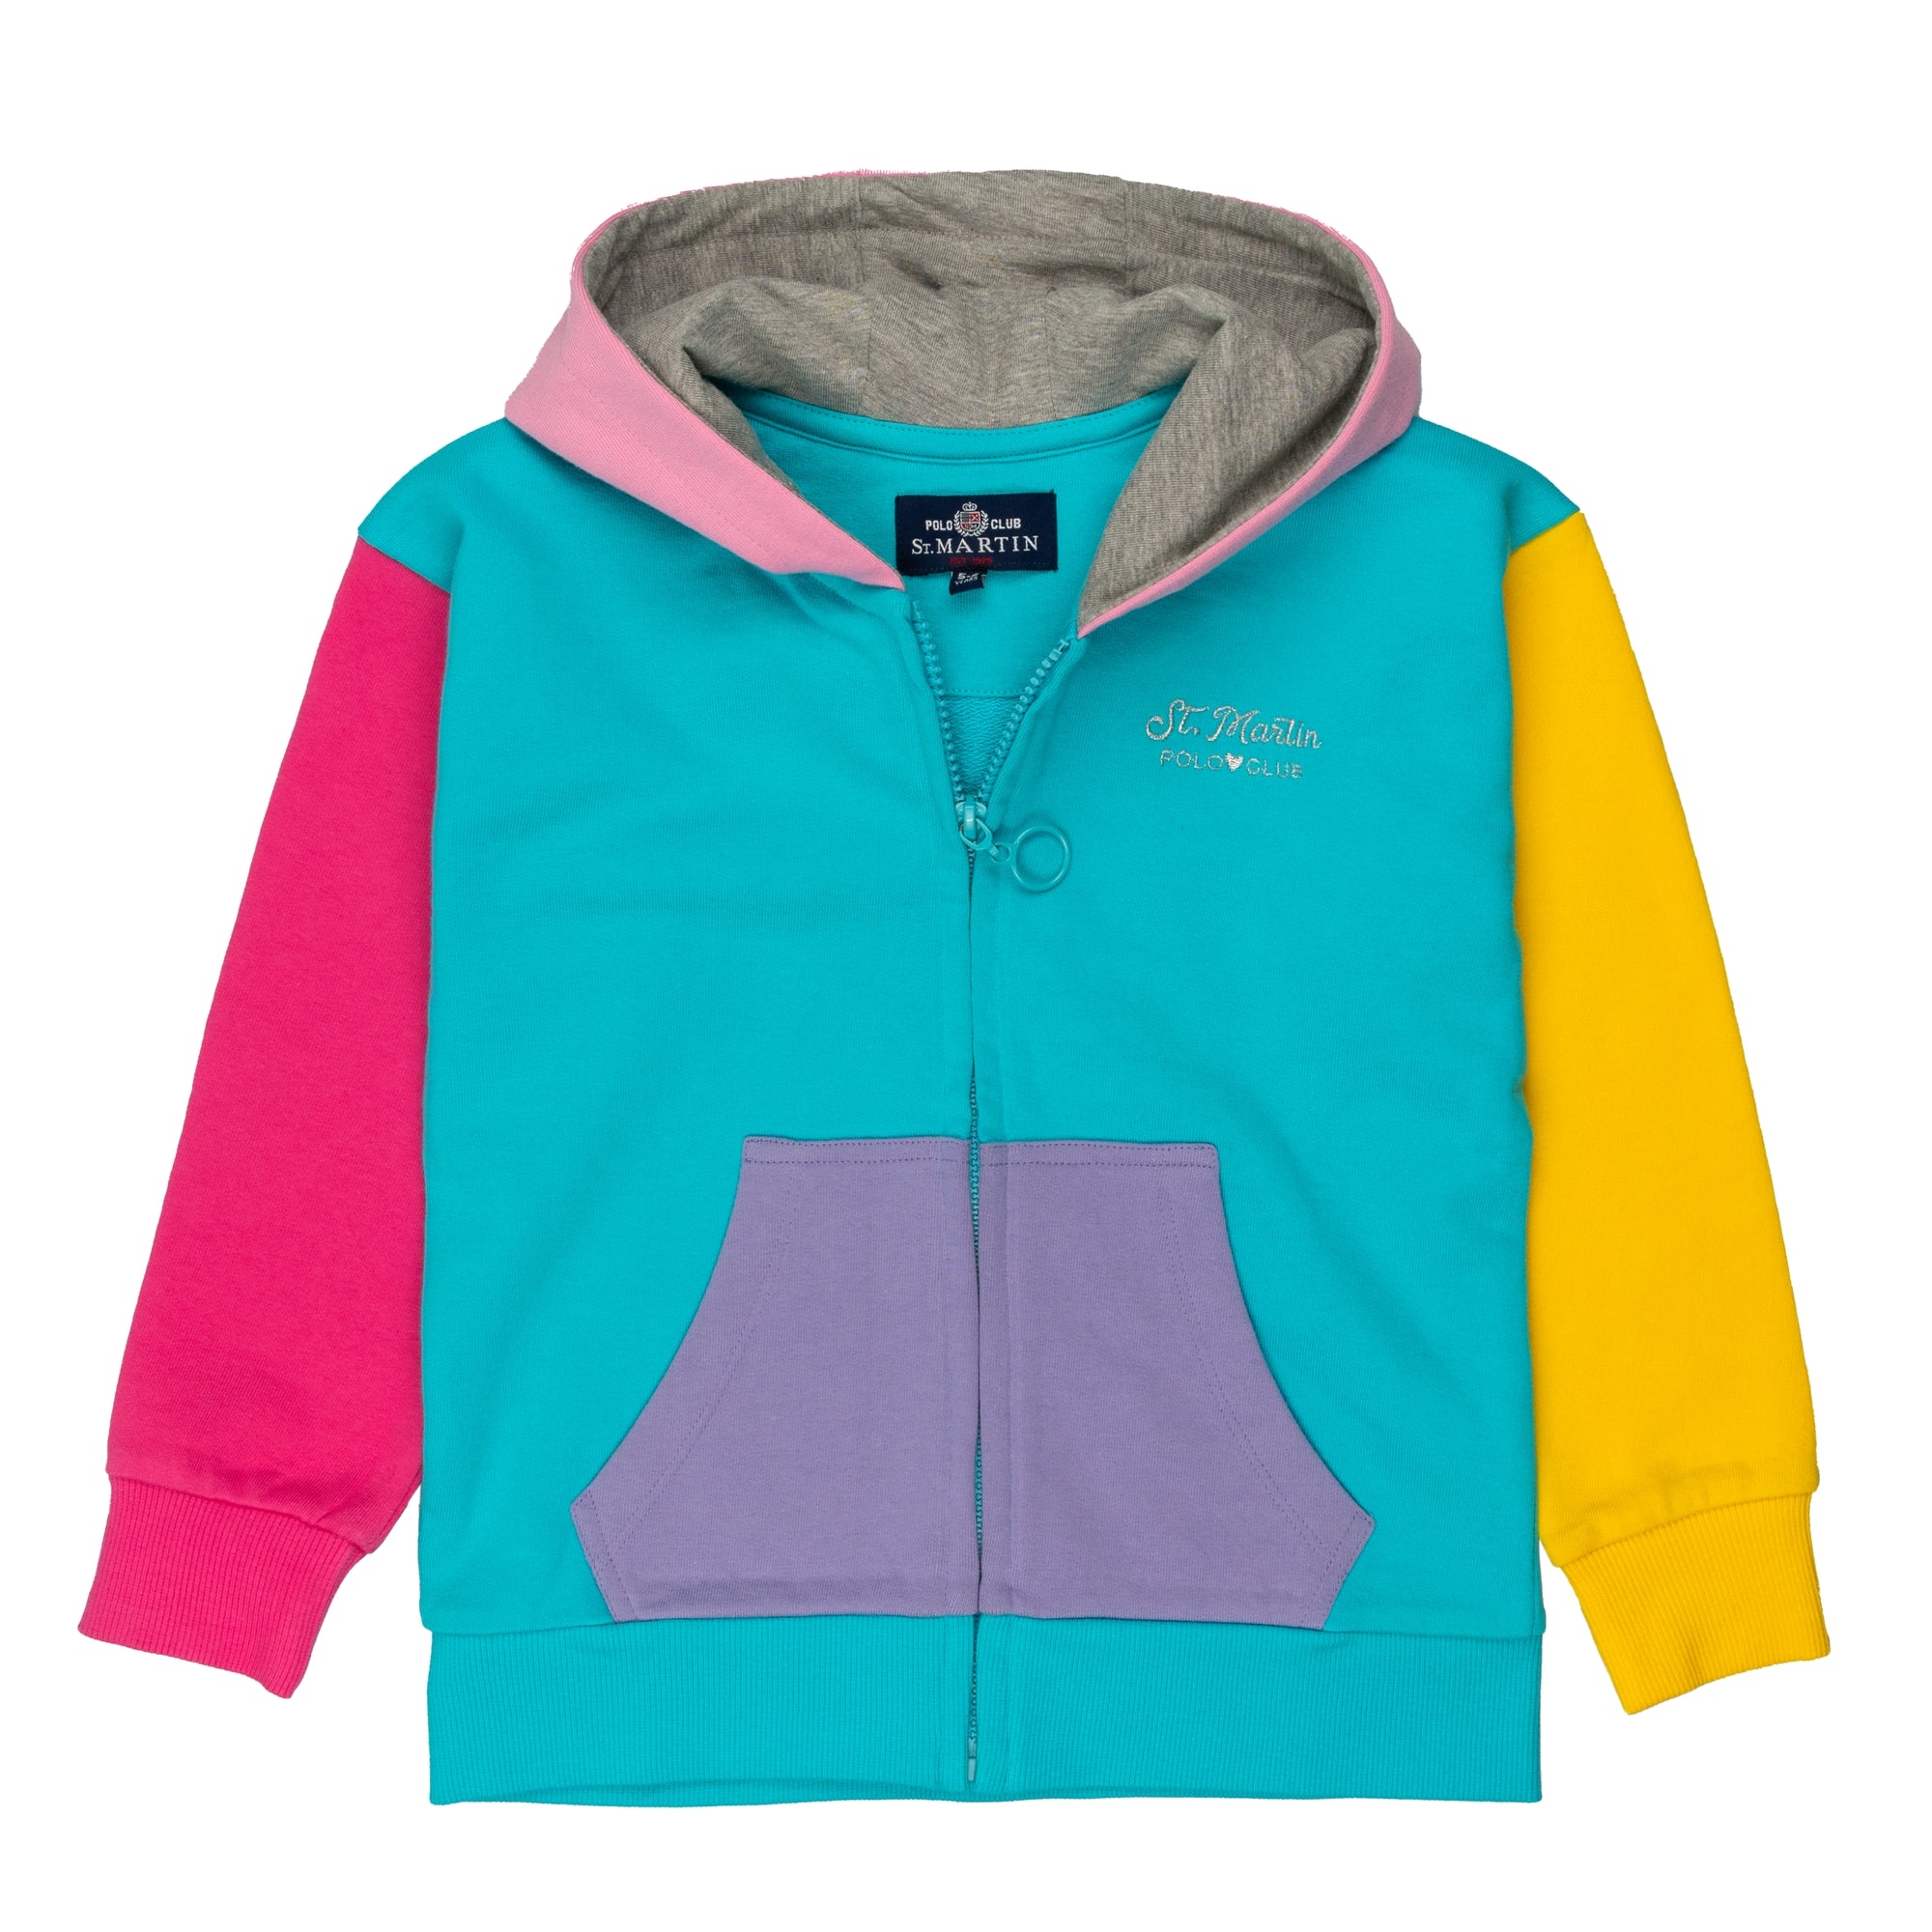 Multicolor French terry sweatshirt with hood